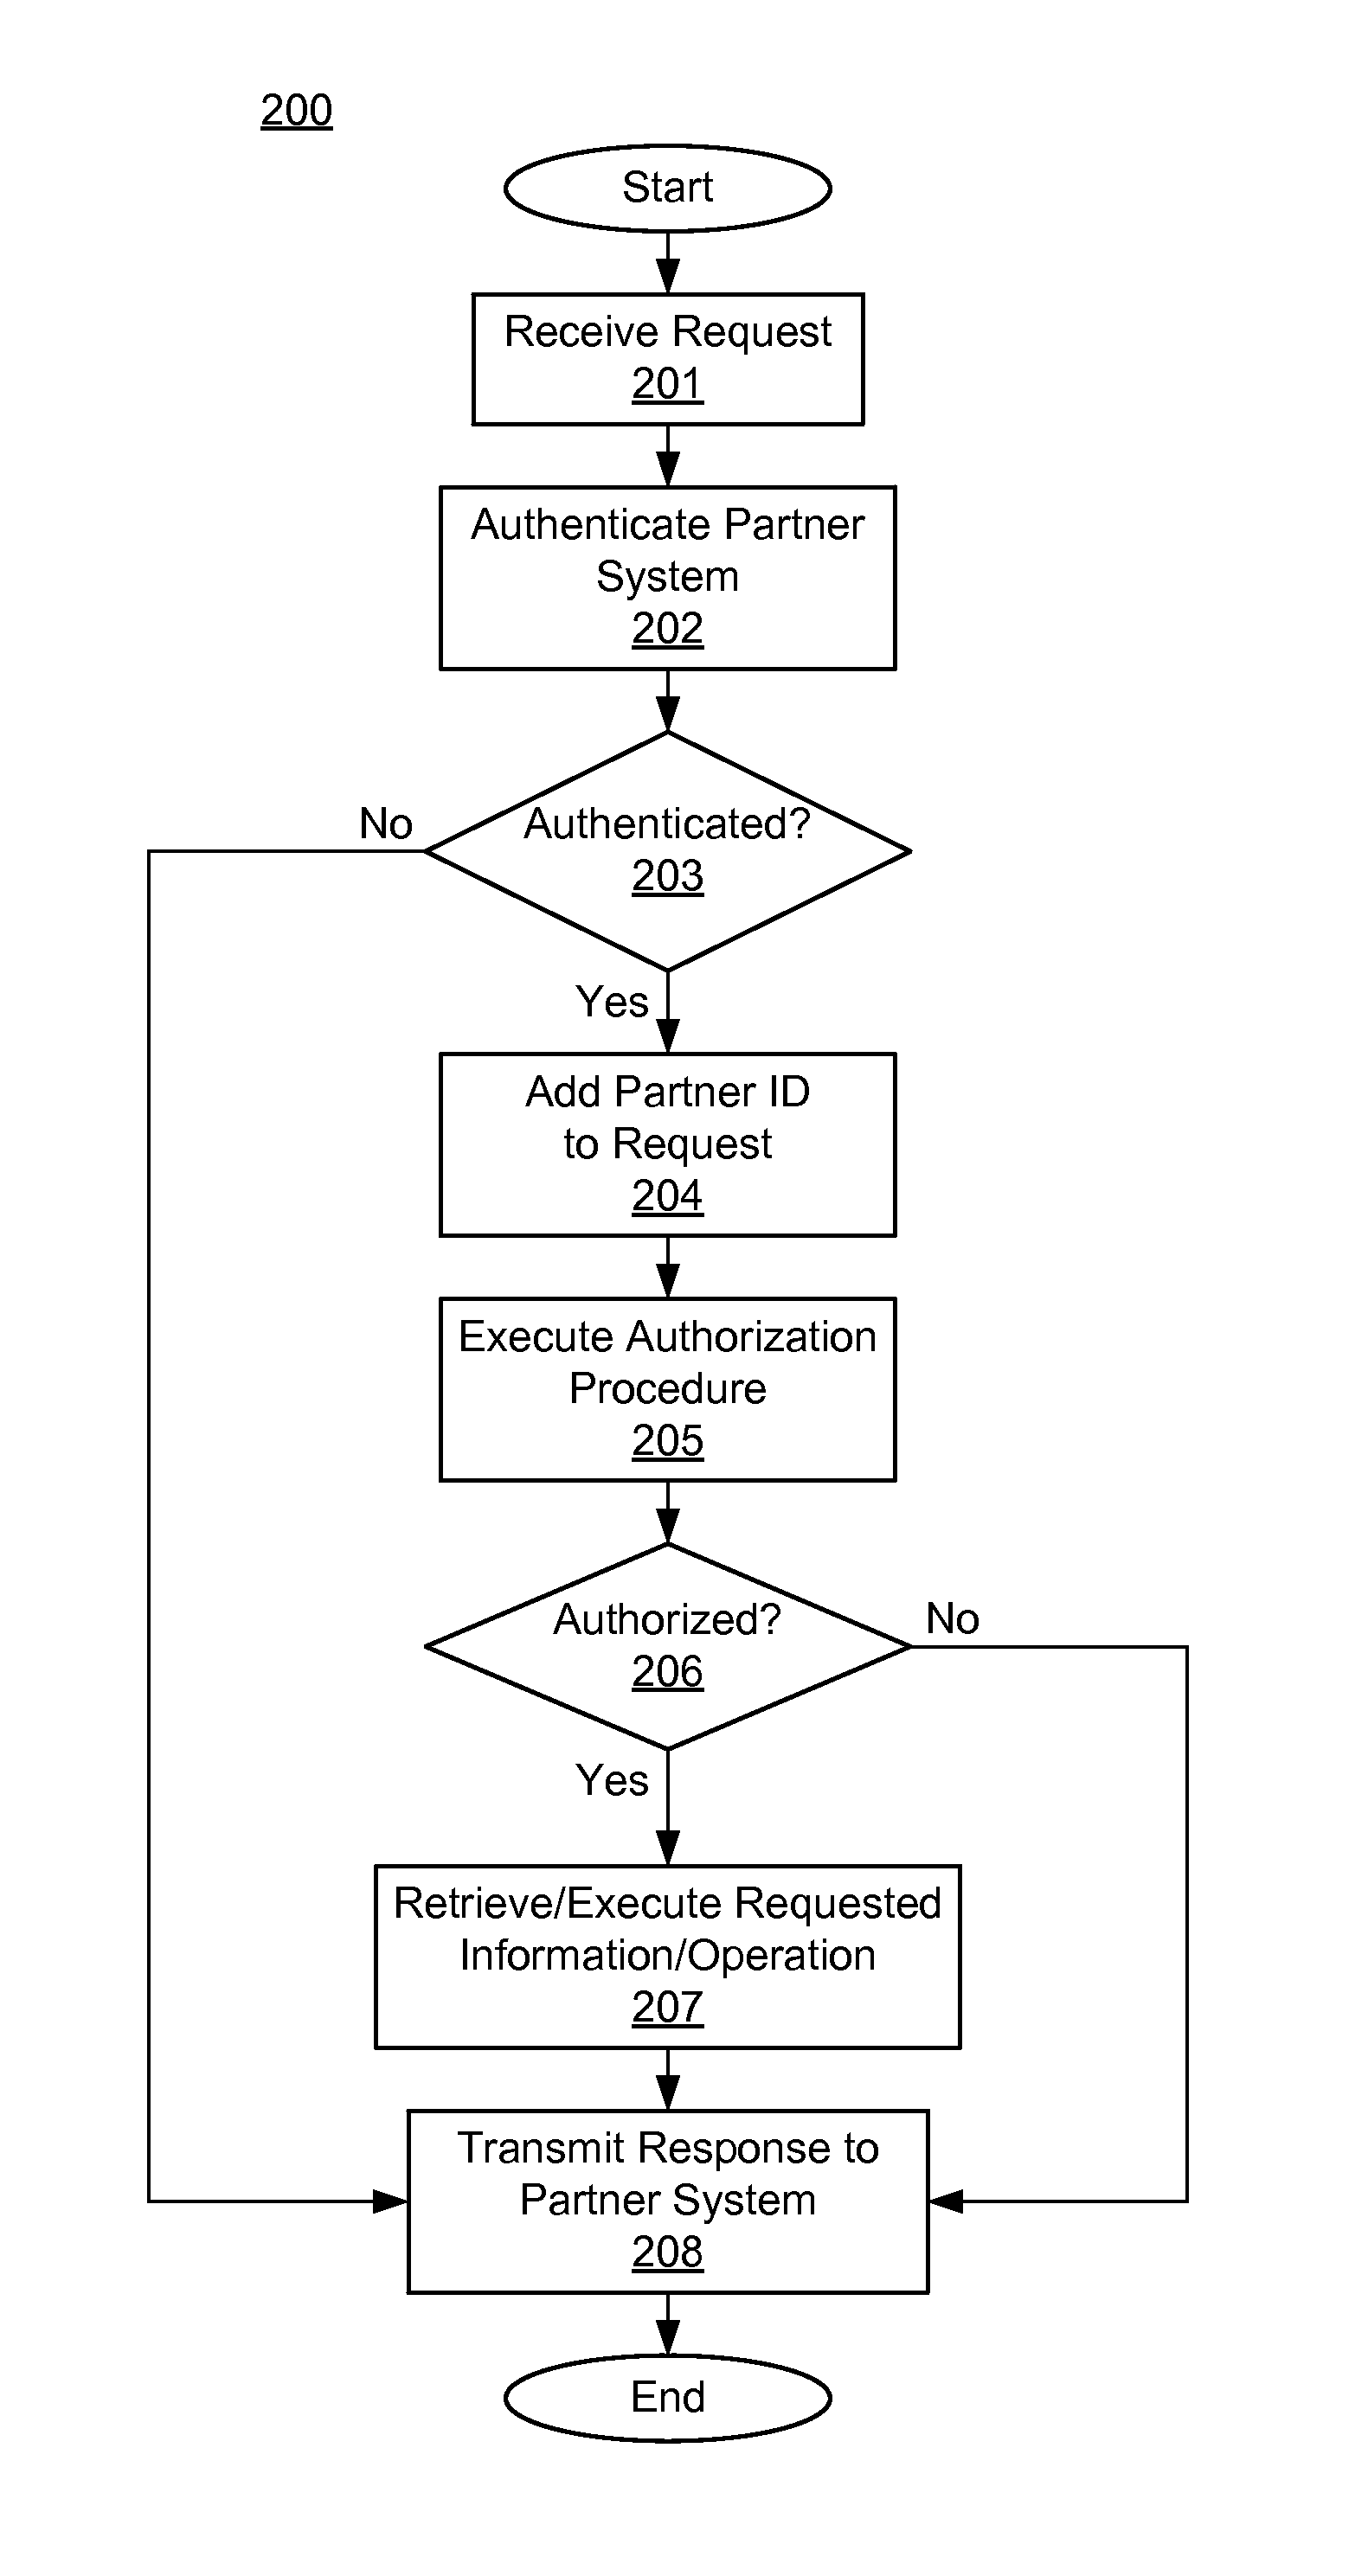 Systems, methods, and computer program products for processing a request relating to a mobile communication device